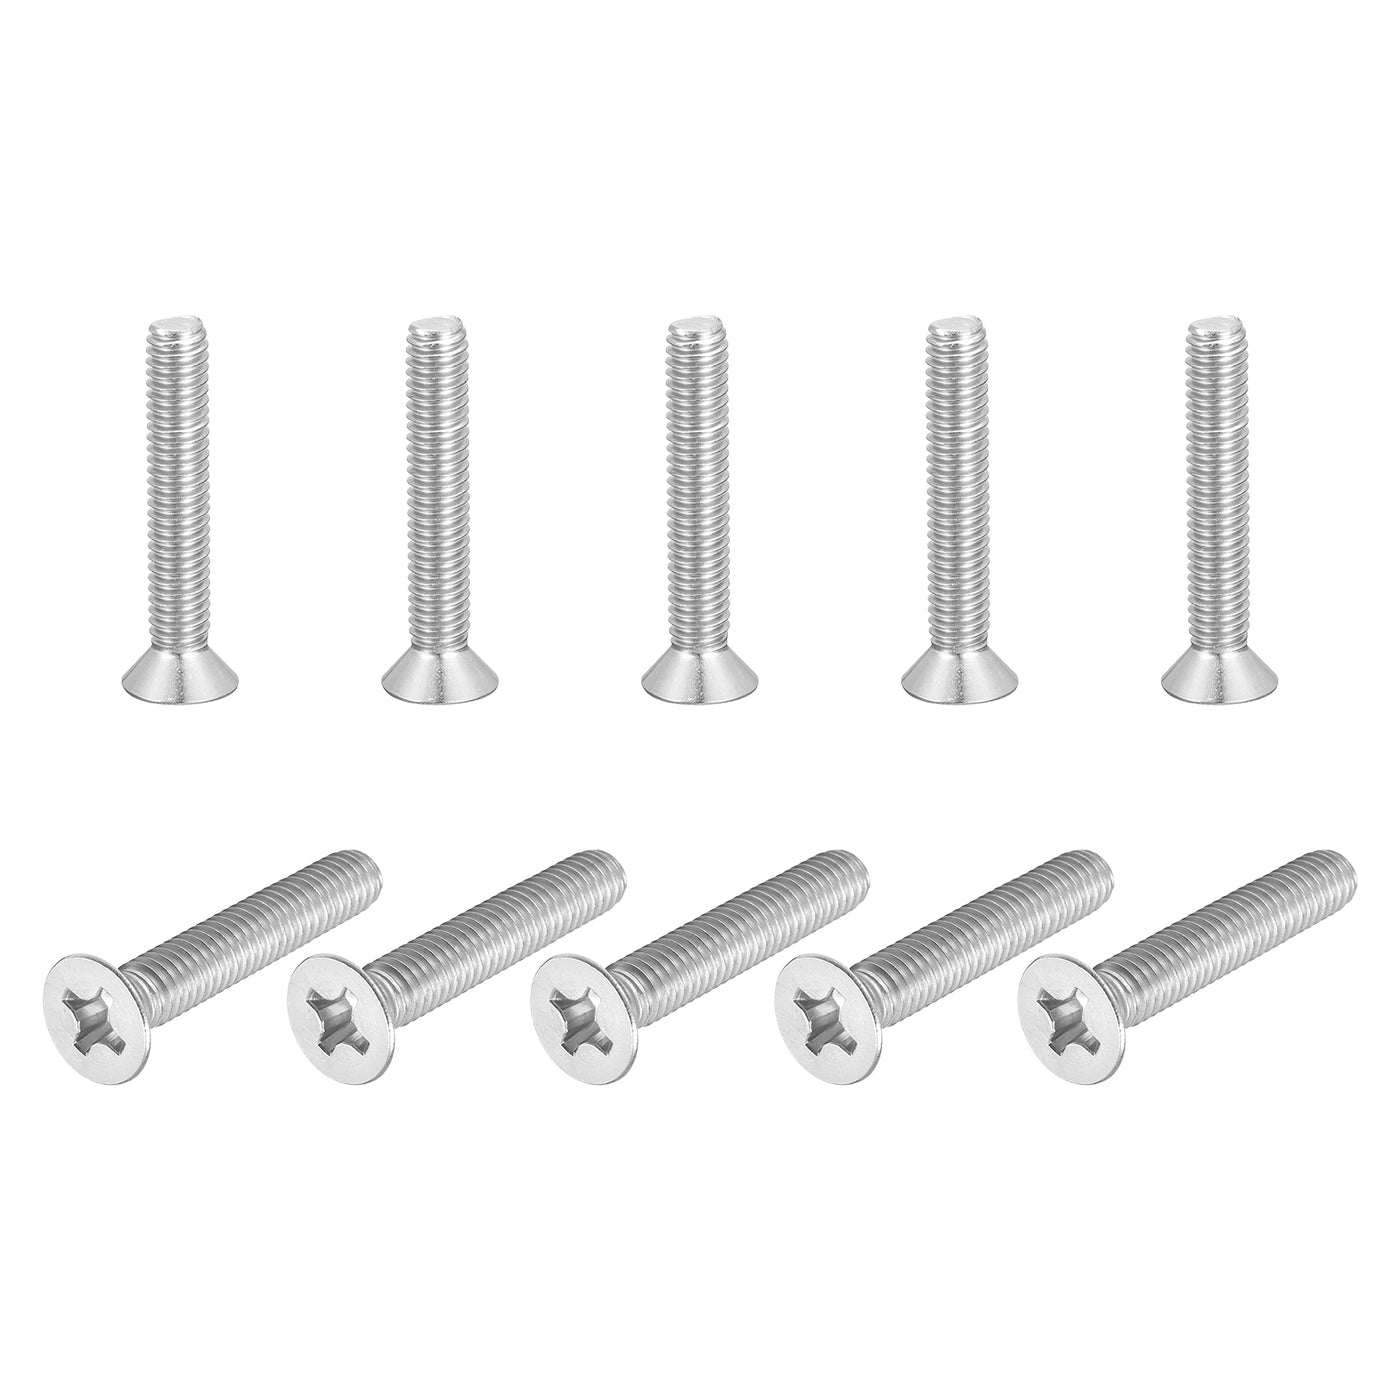 uxcell Uxcell 5/16-18x2" Flat Head Machine Screws Phillips 304 Stainless Steel Bolts 10pcs